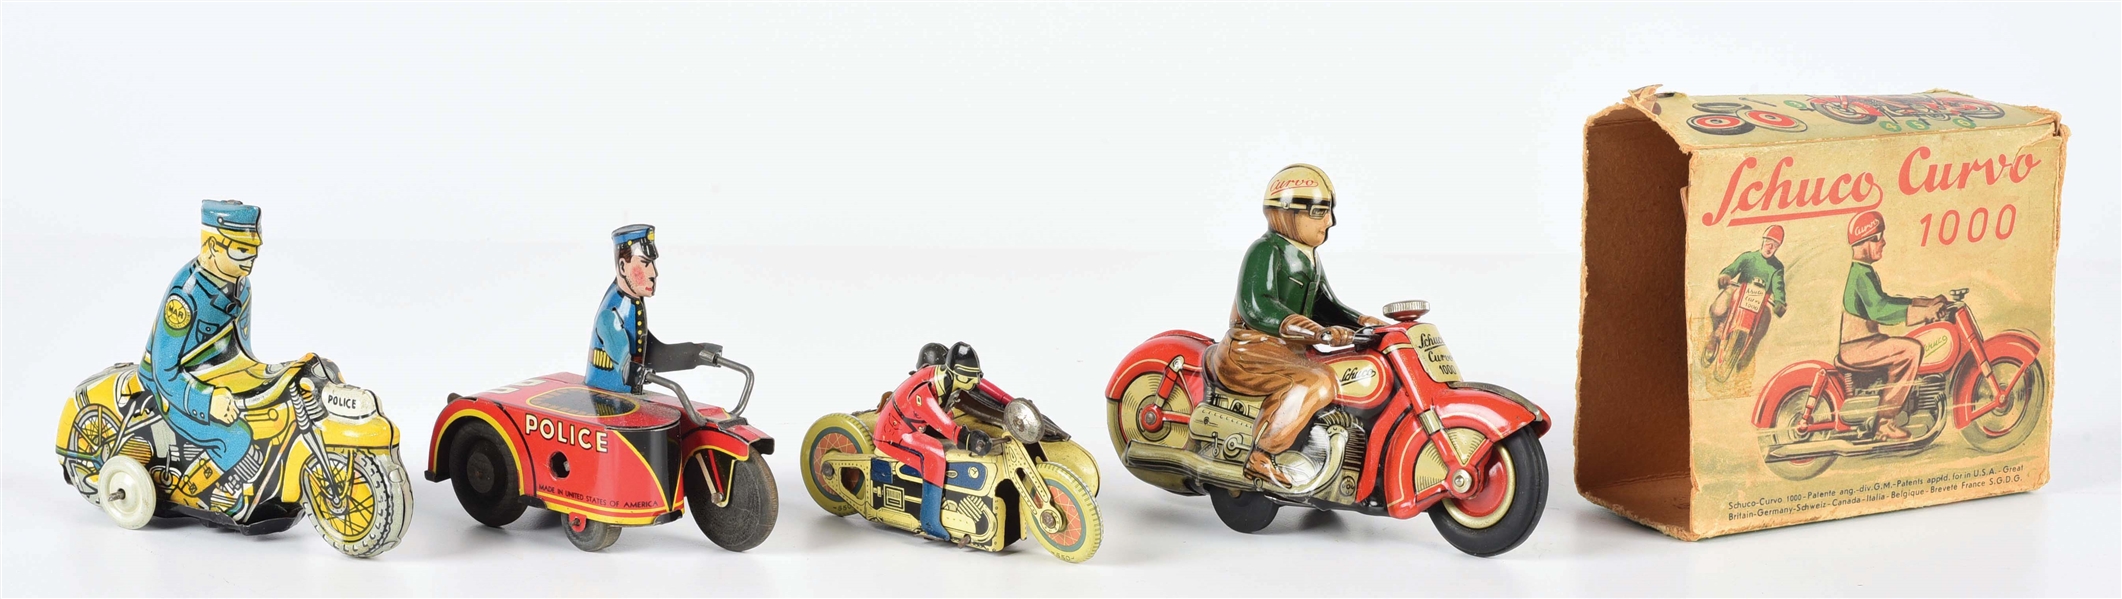 LOT OF 4: AMERICAN AND EUROPEAN TIN LITHO WIND-UP MOTORCYCLE TOYS.